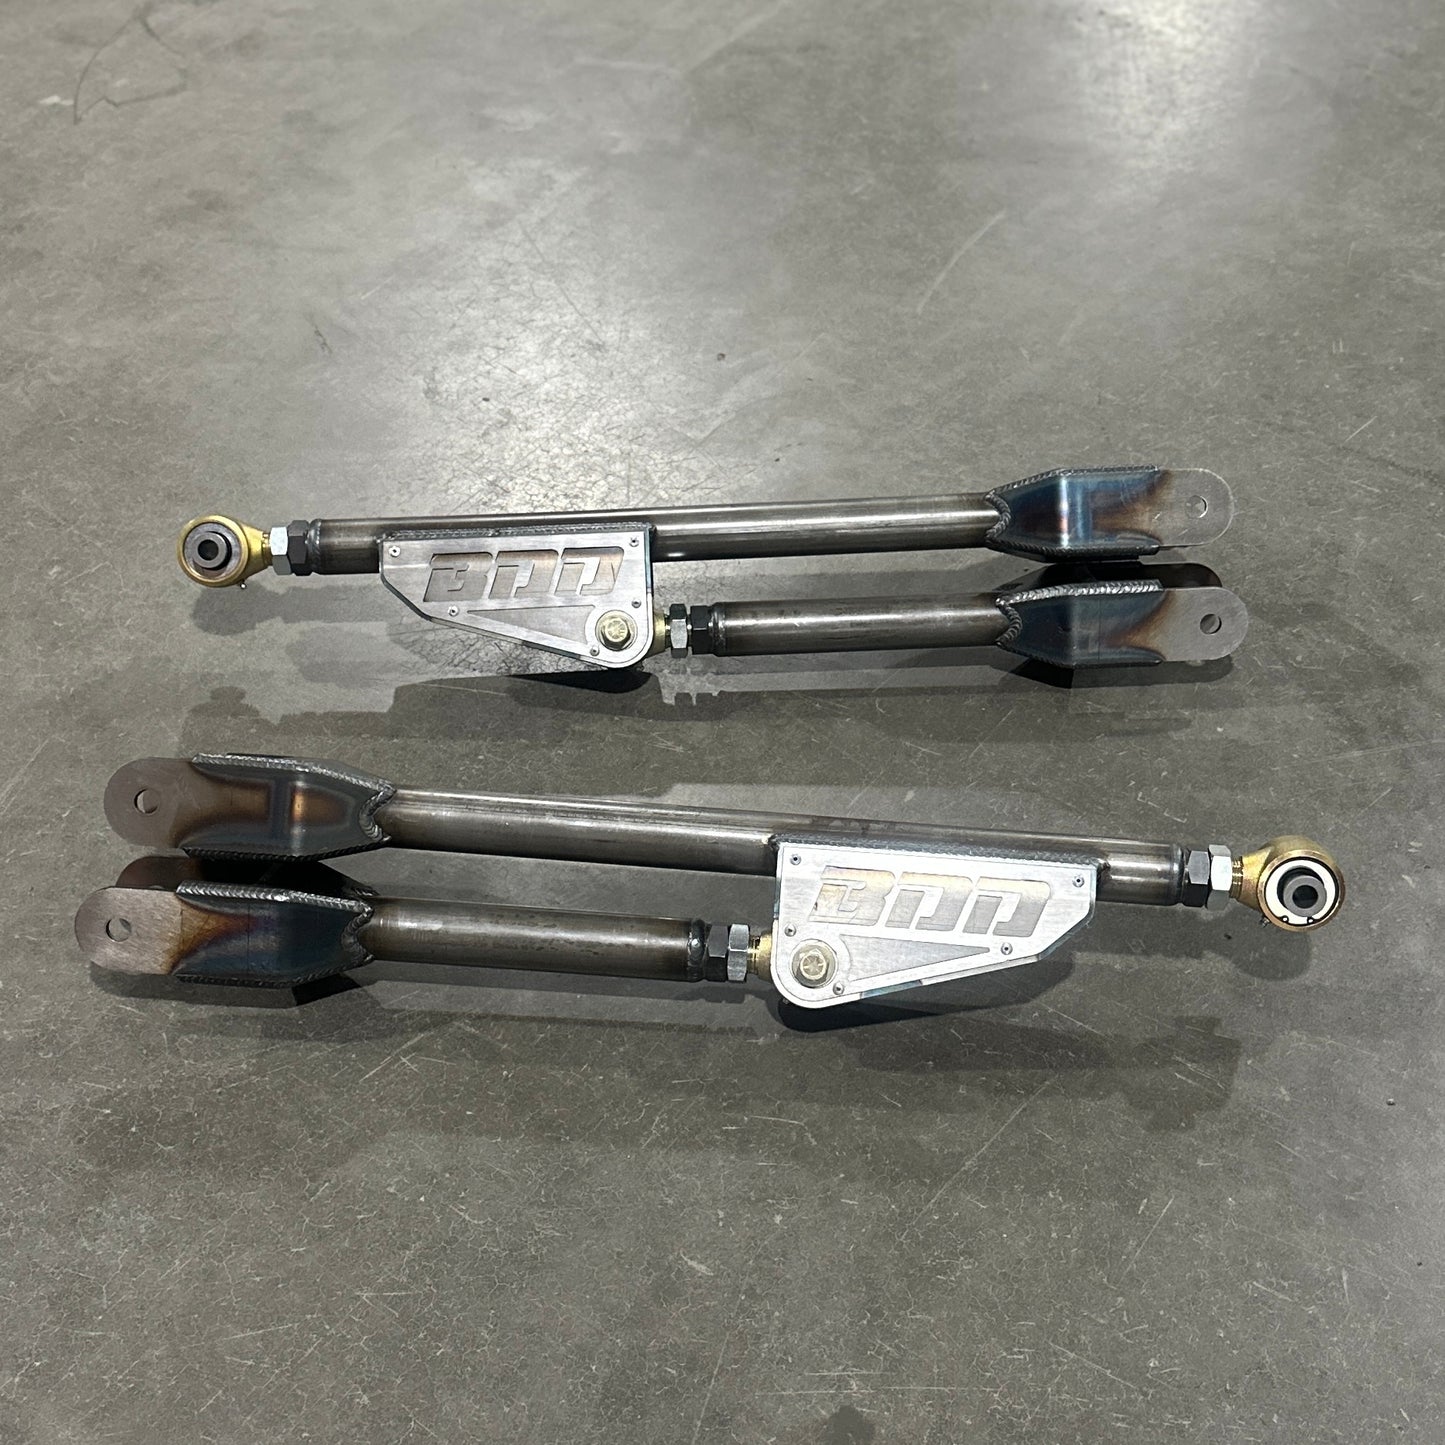 Fabricated Radius Arms for 05-16 Super Duty Axles